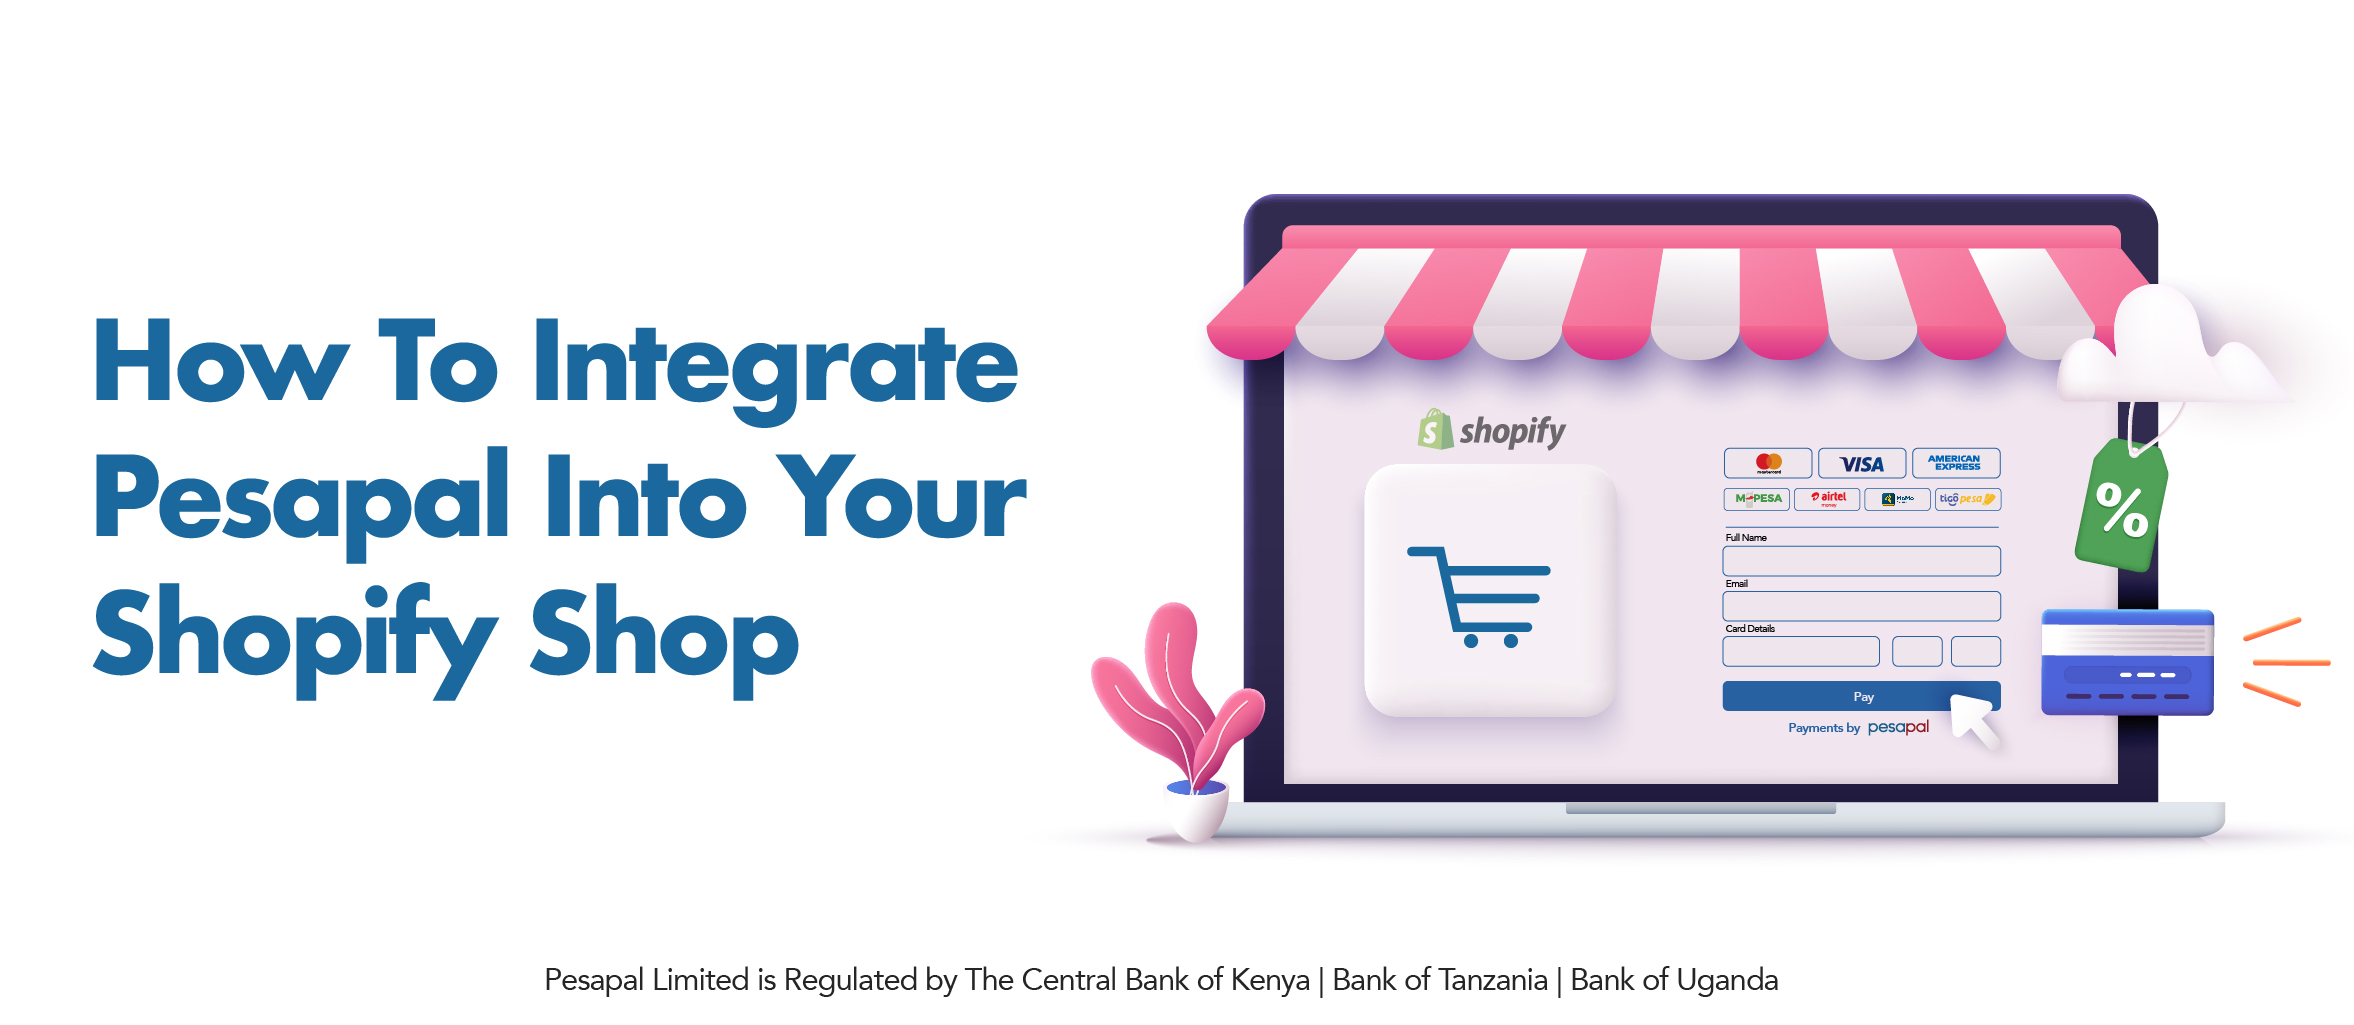 How To Integrate Pesapal Into Your Shopify Shop